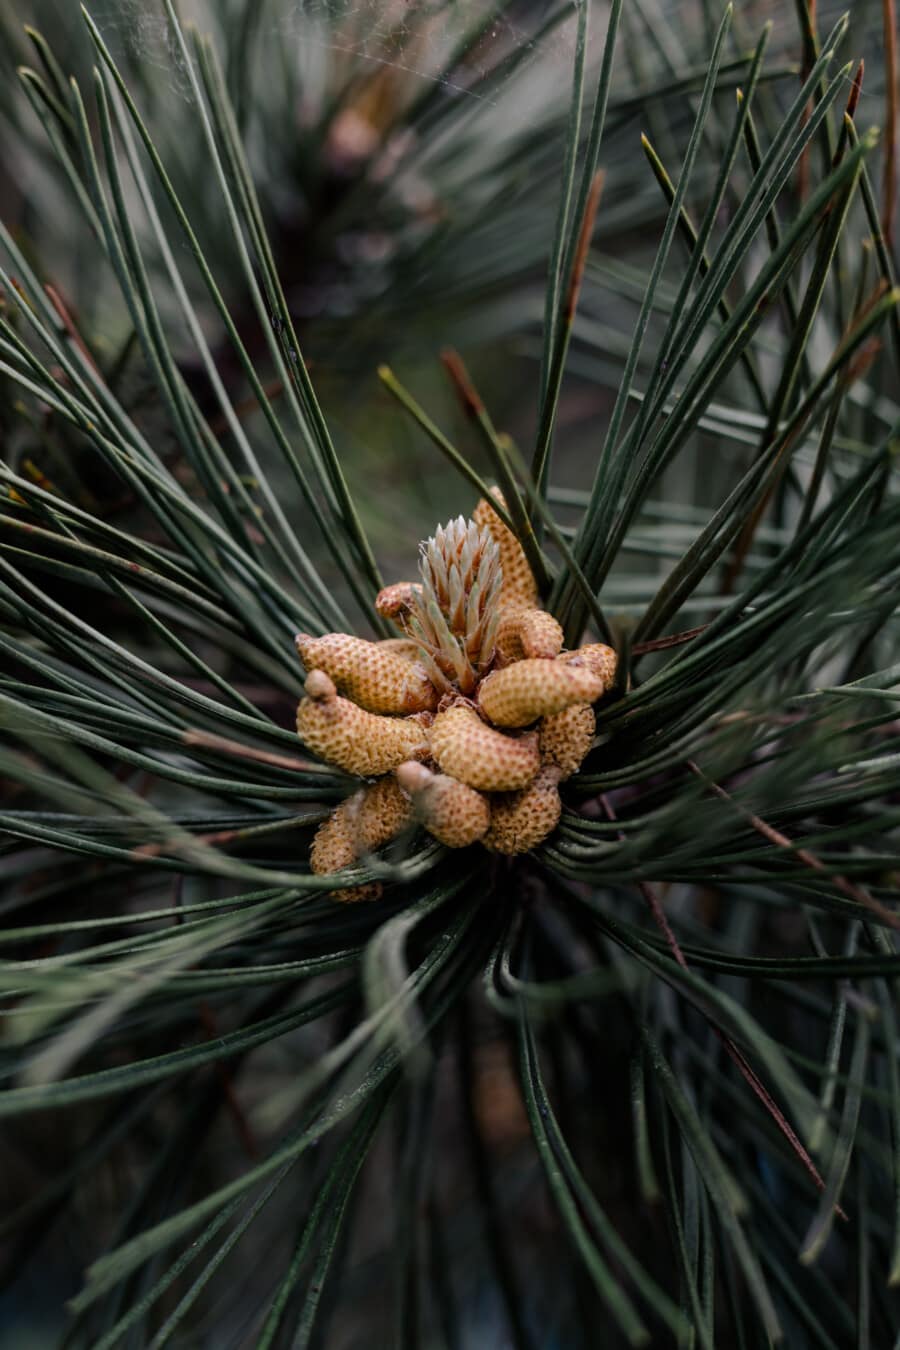 conifers, branchlet, close-up, cypress, pine, leaf, trees, nature, evergreen, conifer